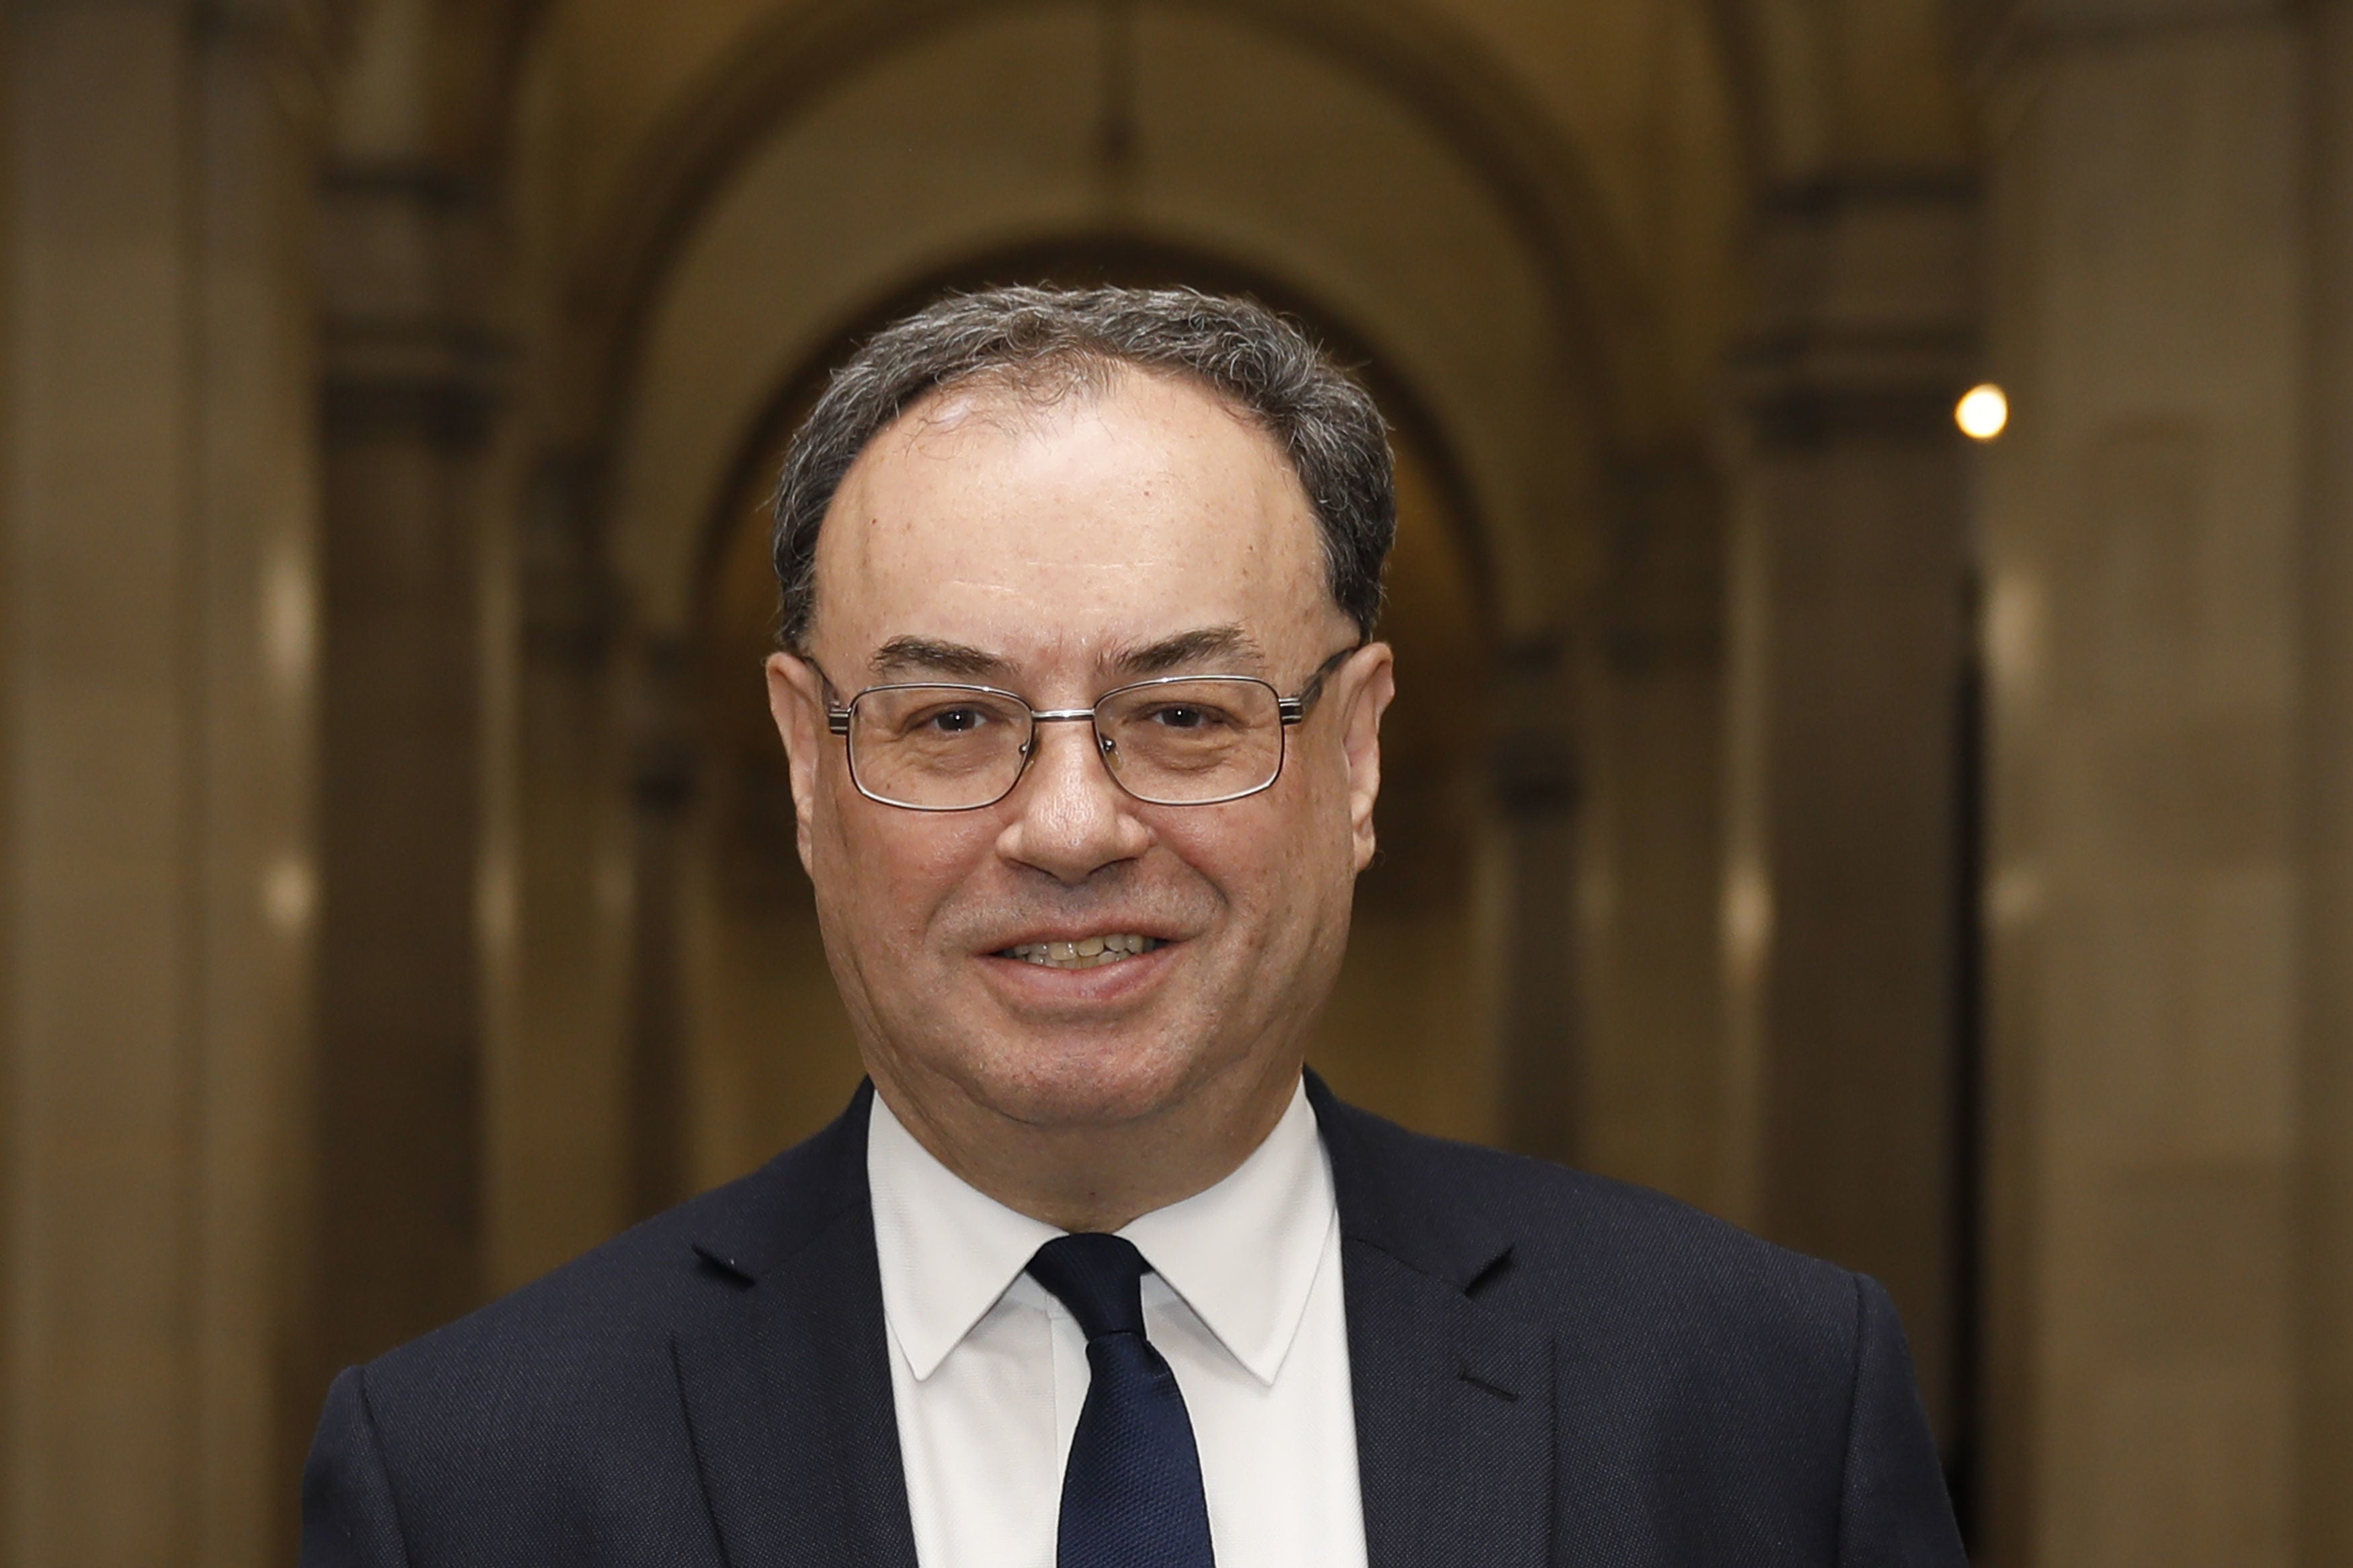 ‘We will need more evidence than we usually do that we are seeing sustainable inflation,’ says the Bank of England’s Andrew Bailey